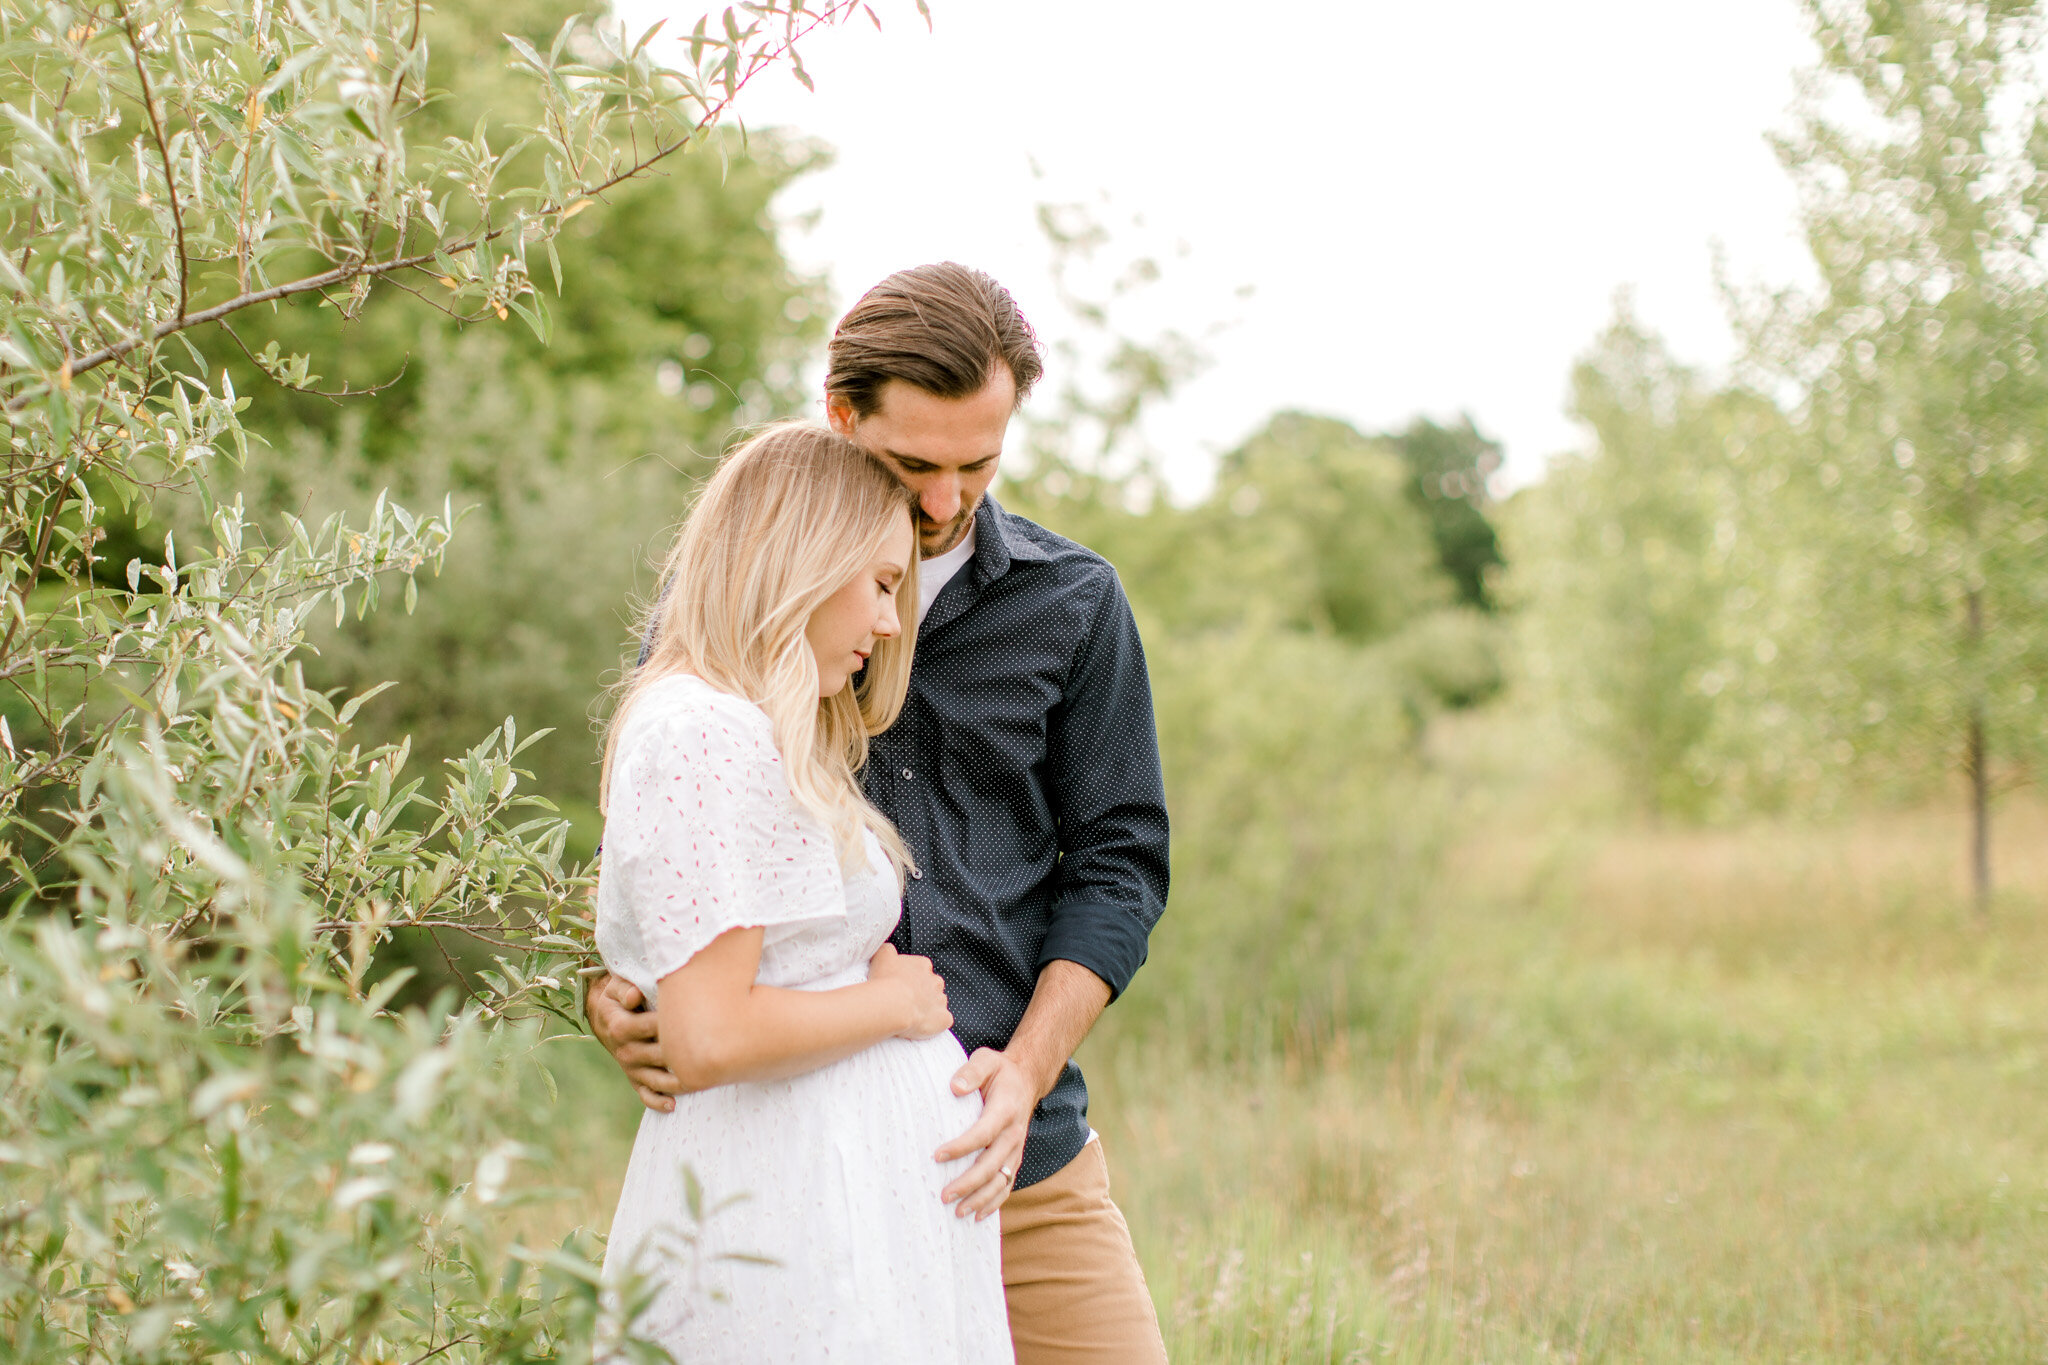 Sunrise Maternity Session in Rockford, Michigan | Light &amp; Airy Fine Art Family Photography in West Michigan